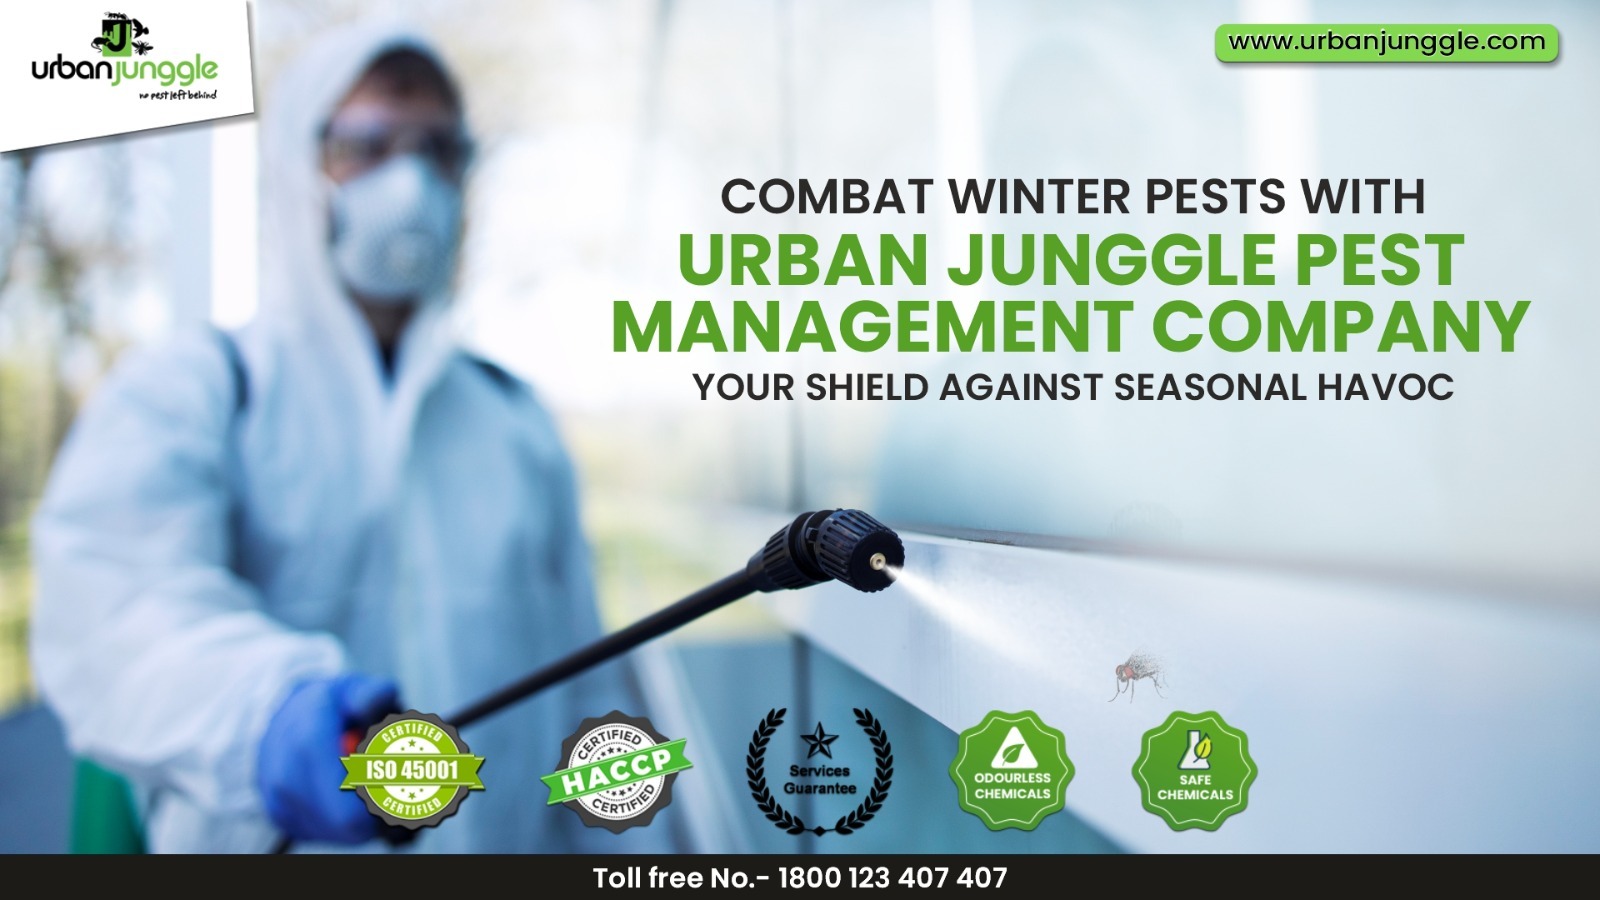 Combat Winter Pests with Urban Junggle Pest Management Company – Your Shield Against Seasonal Havoc